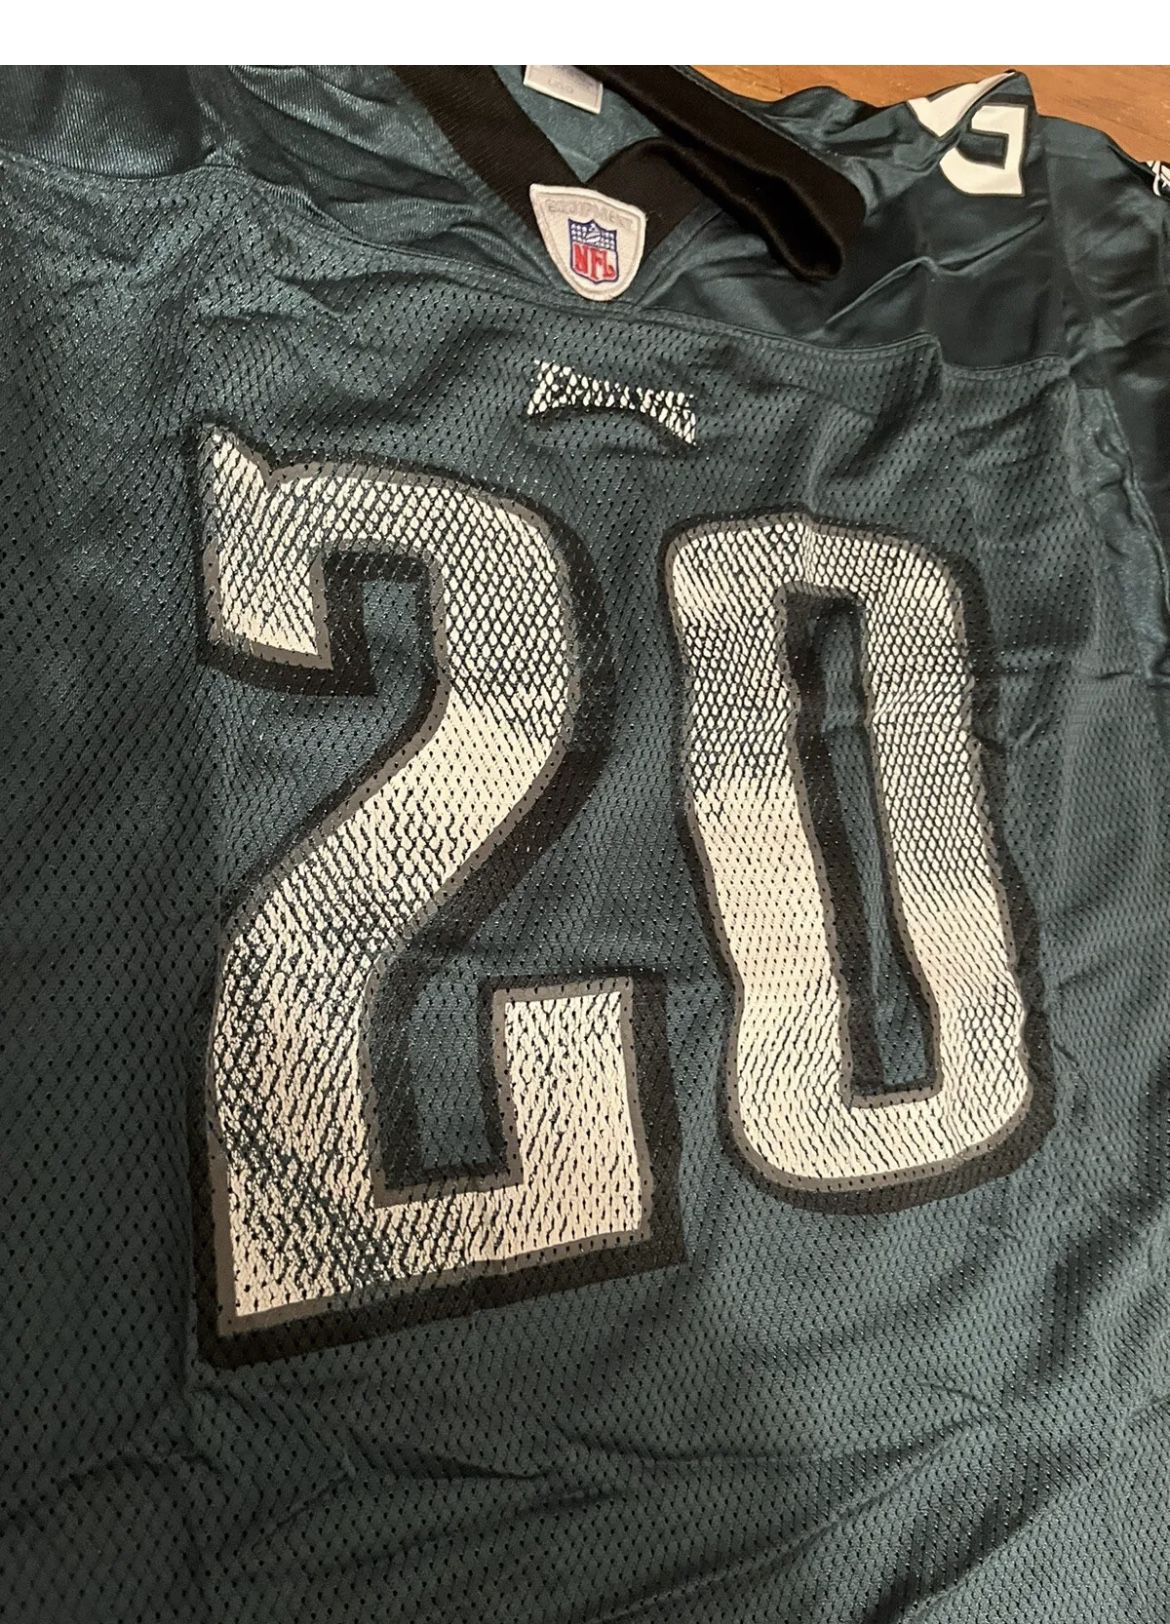 Authentic Brian Dawkins Jersey sz 52 (XL)!! for Sale in Cherry Hill, NJ -  OfferUp